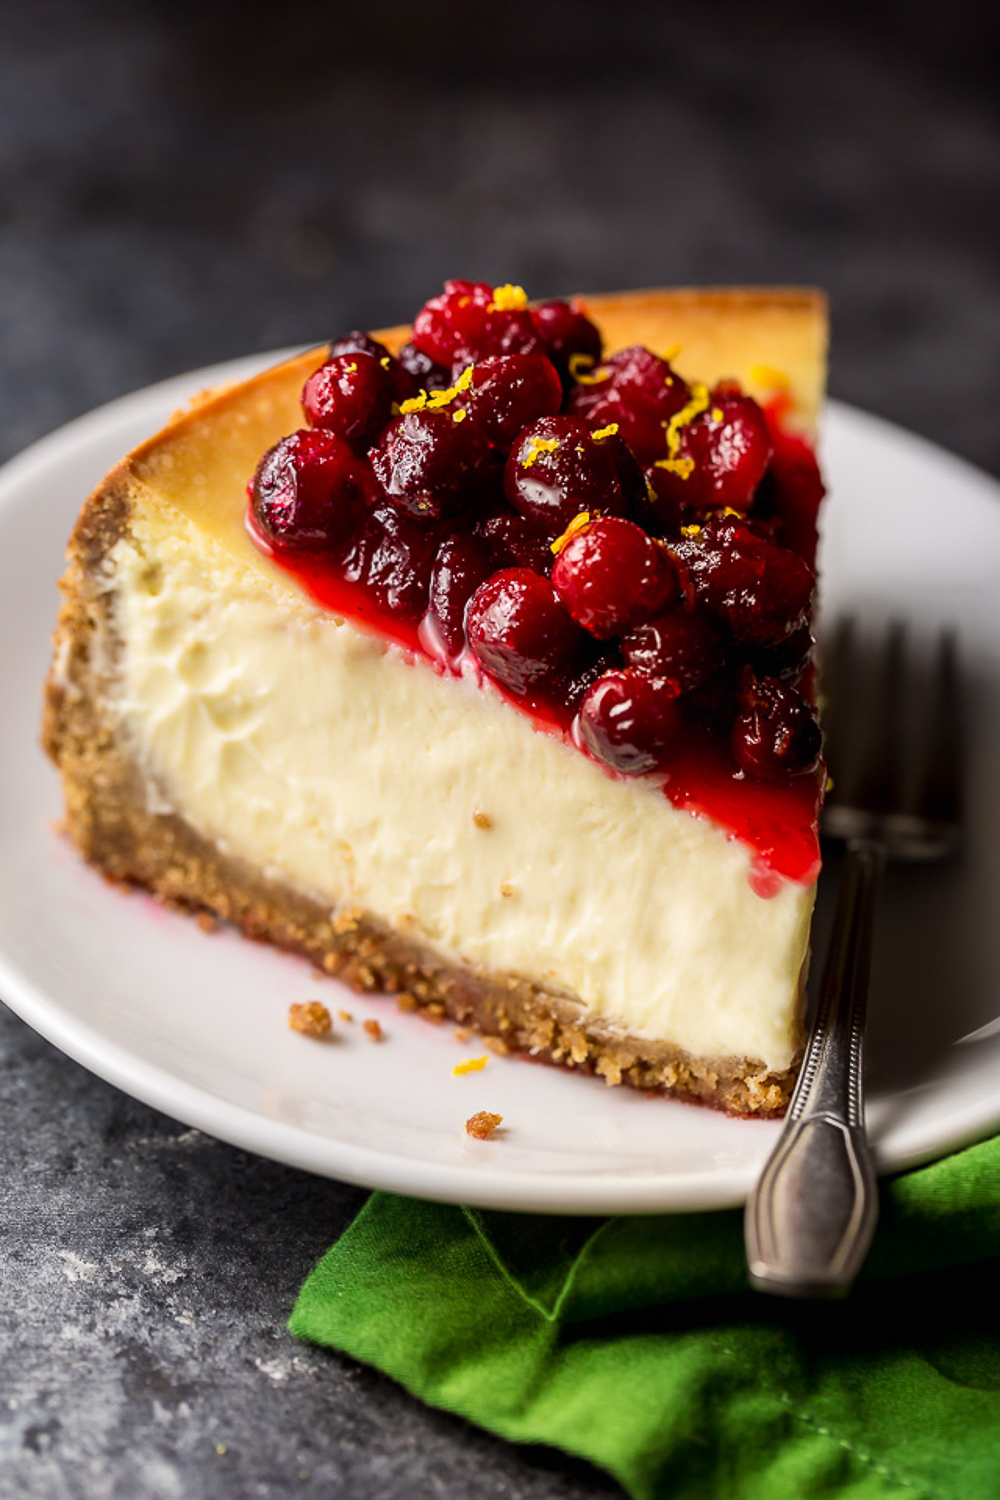 13 Freezer-Friendly Cheesecake Recipes for Holiday Dessert